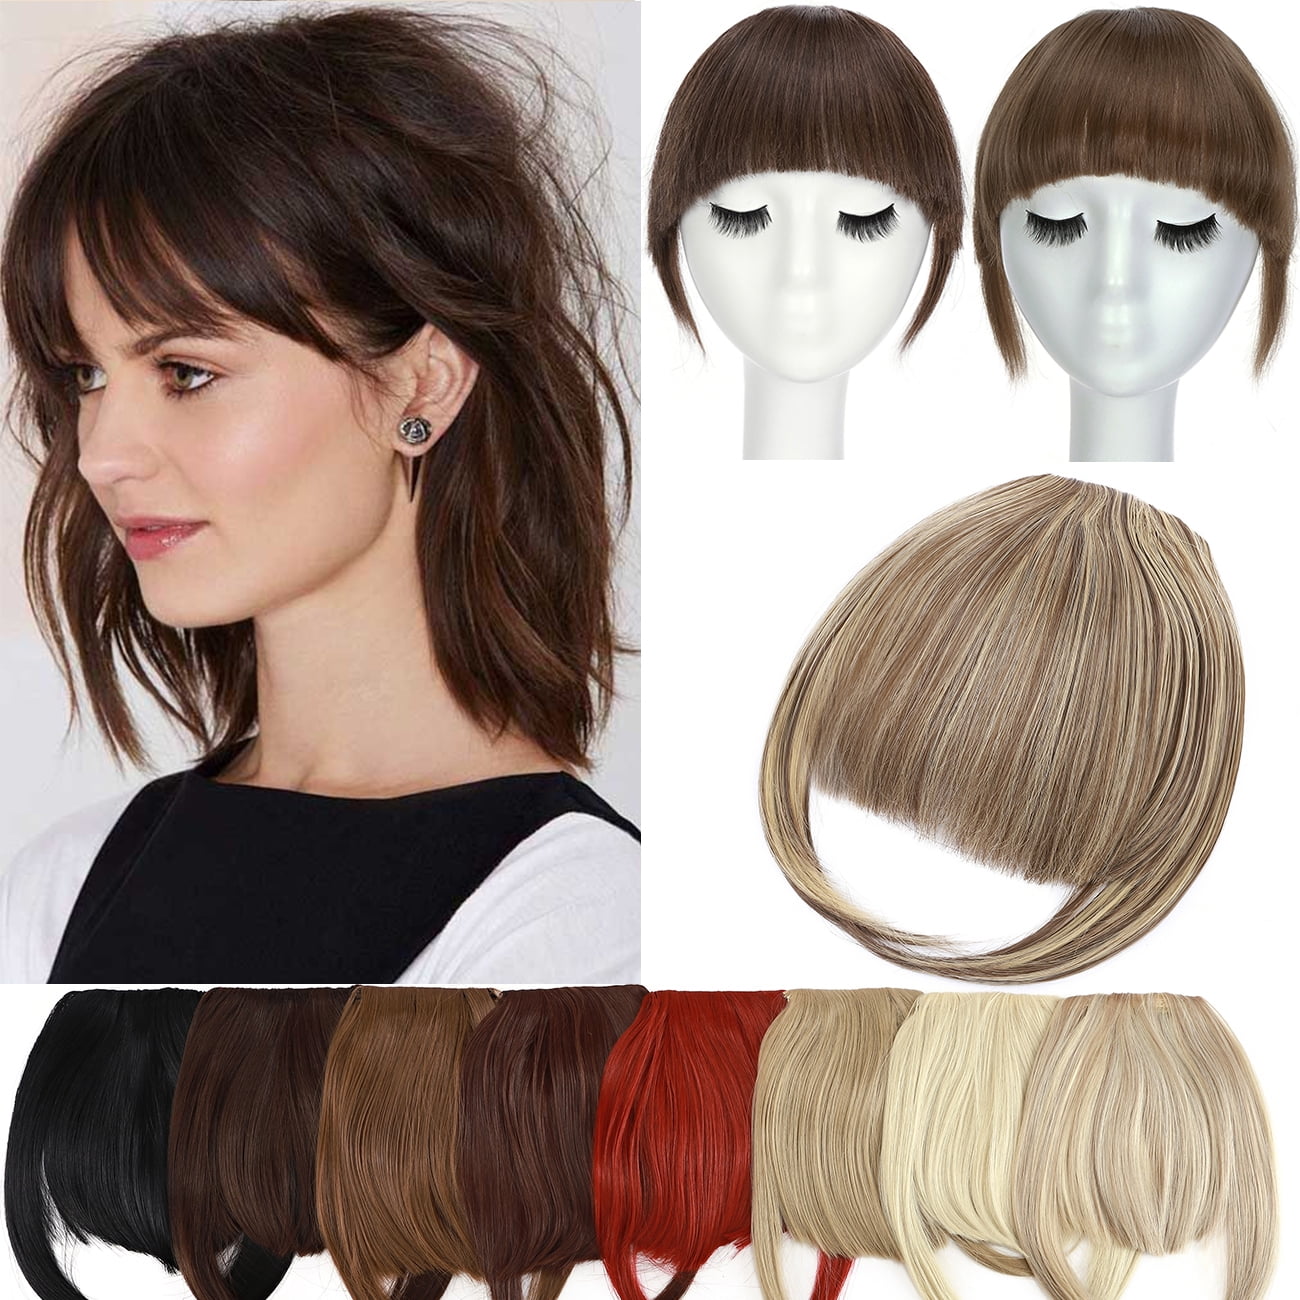 Benehair Clip in Fringe Hair Extensions as Humam Neat Bangs Thick Hairpiece  6